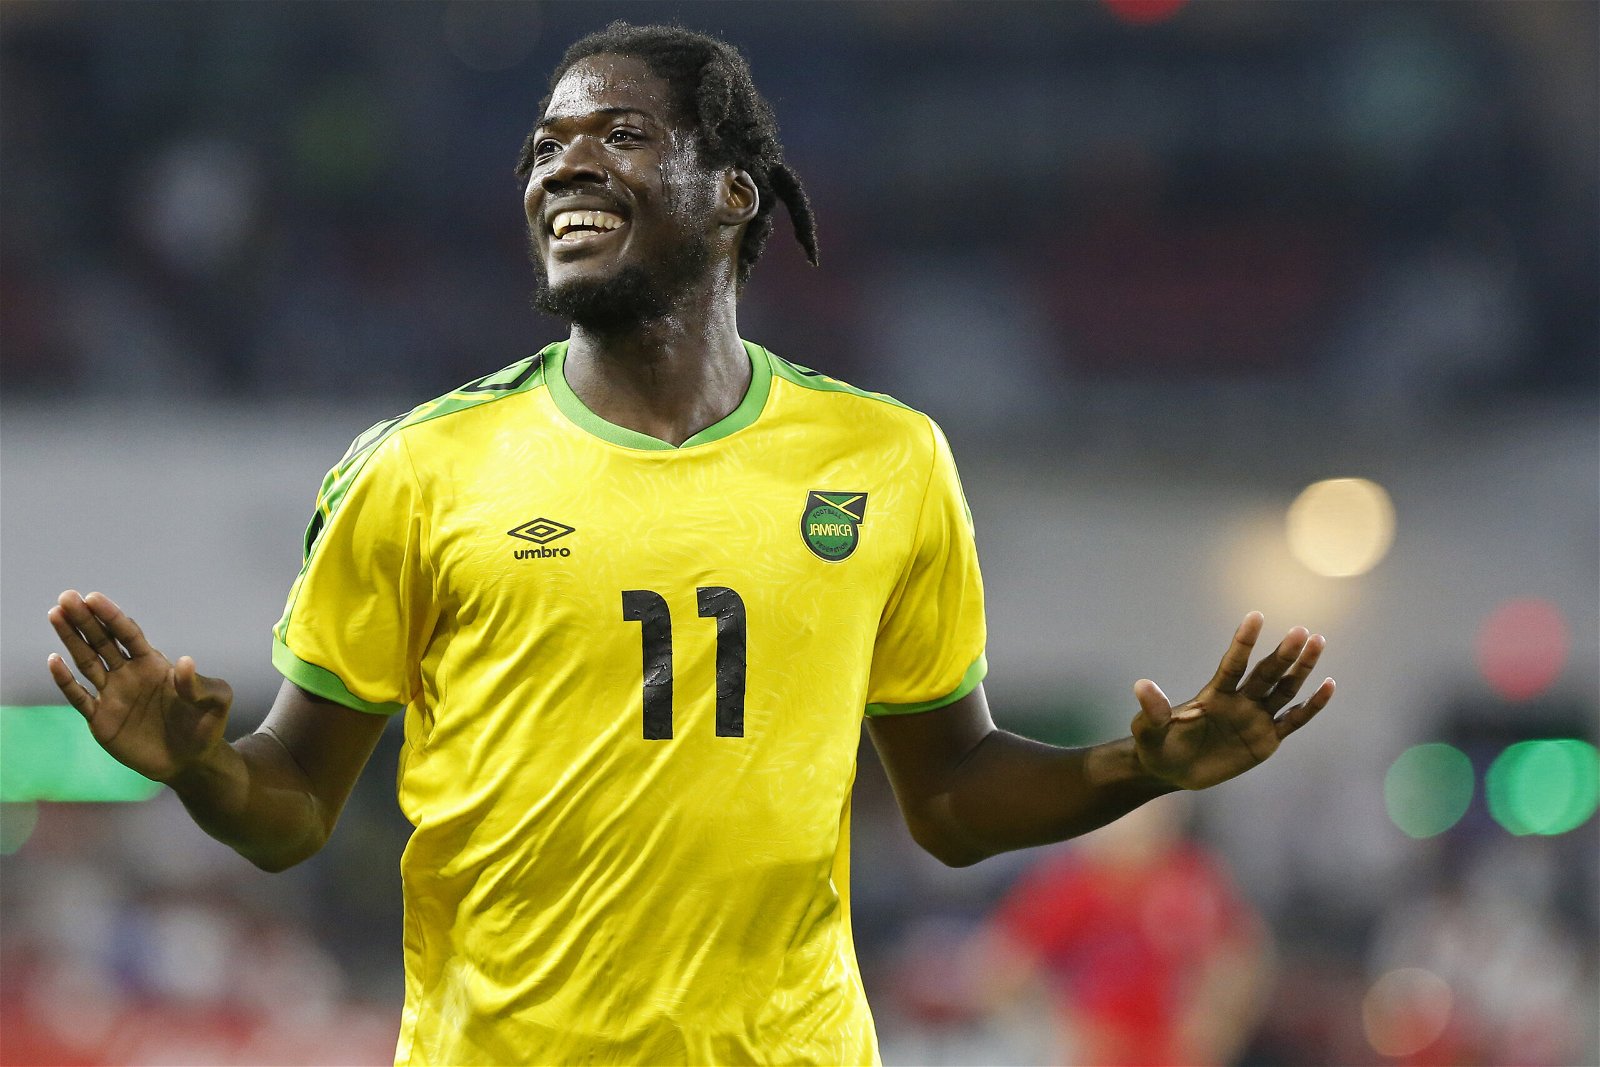 Shamar Nicholson is one of the key players in the Jamaica Copa America Squad